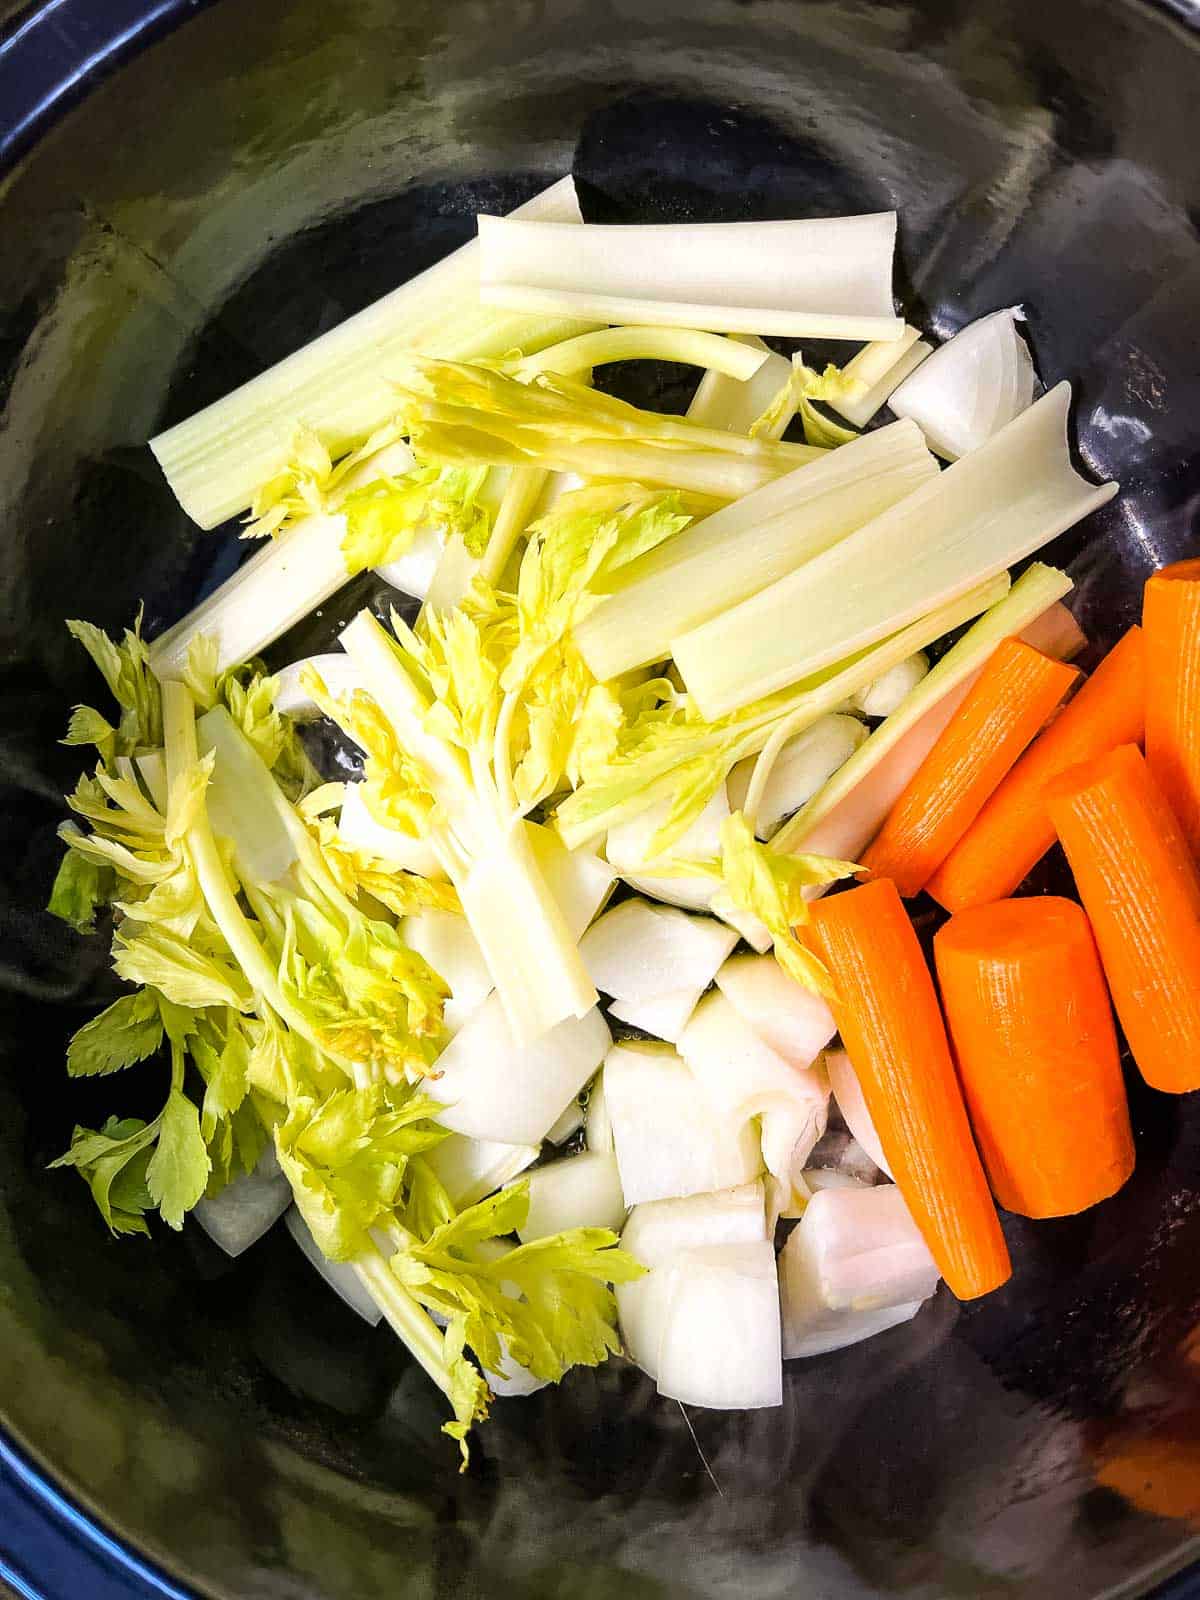 Chopped veggies in the IP Dutch Oven to saute.